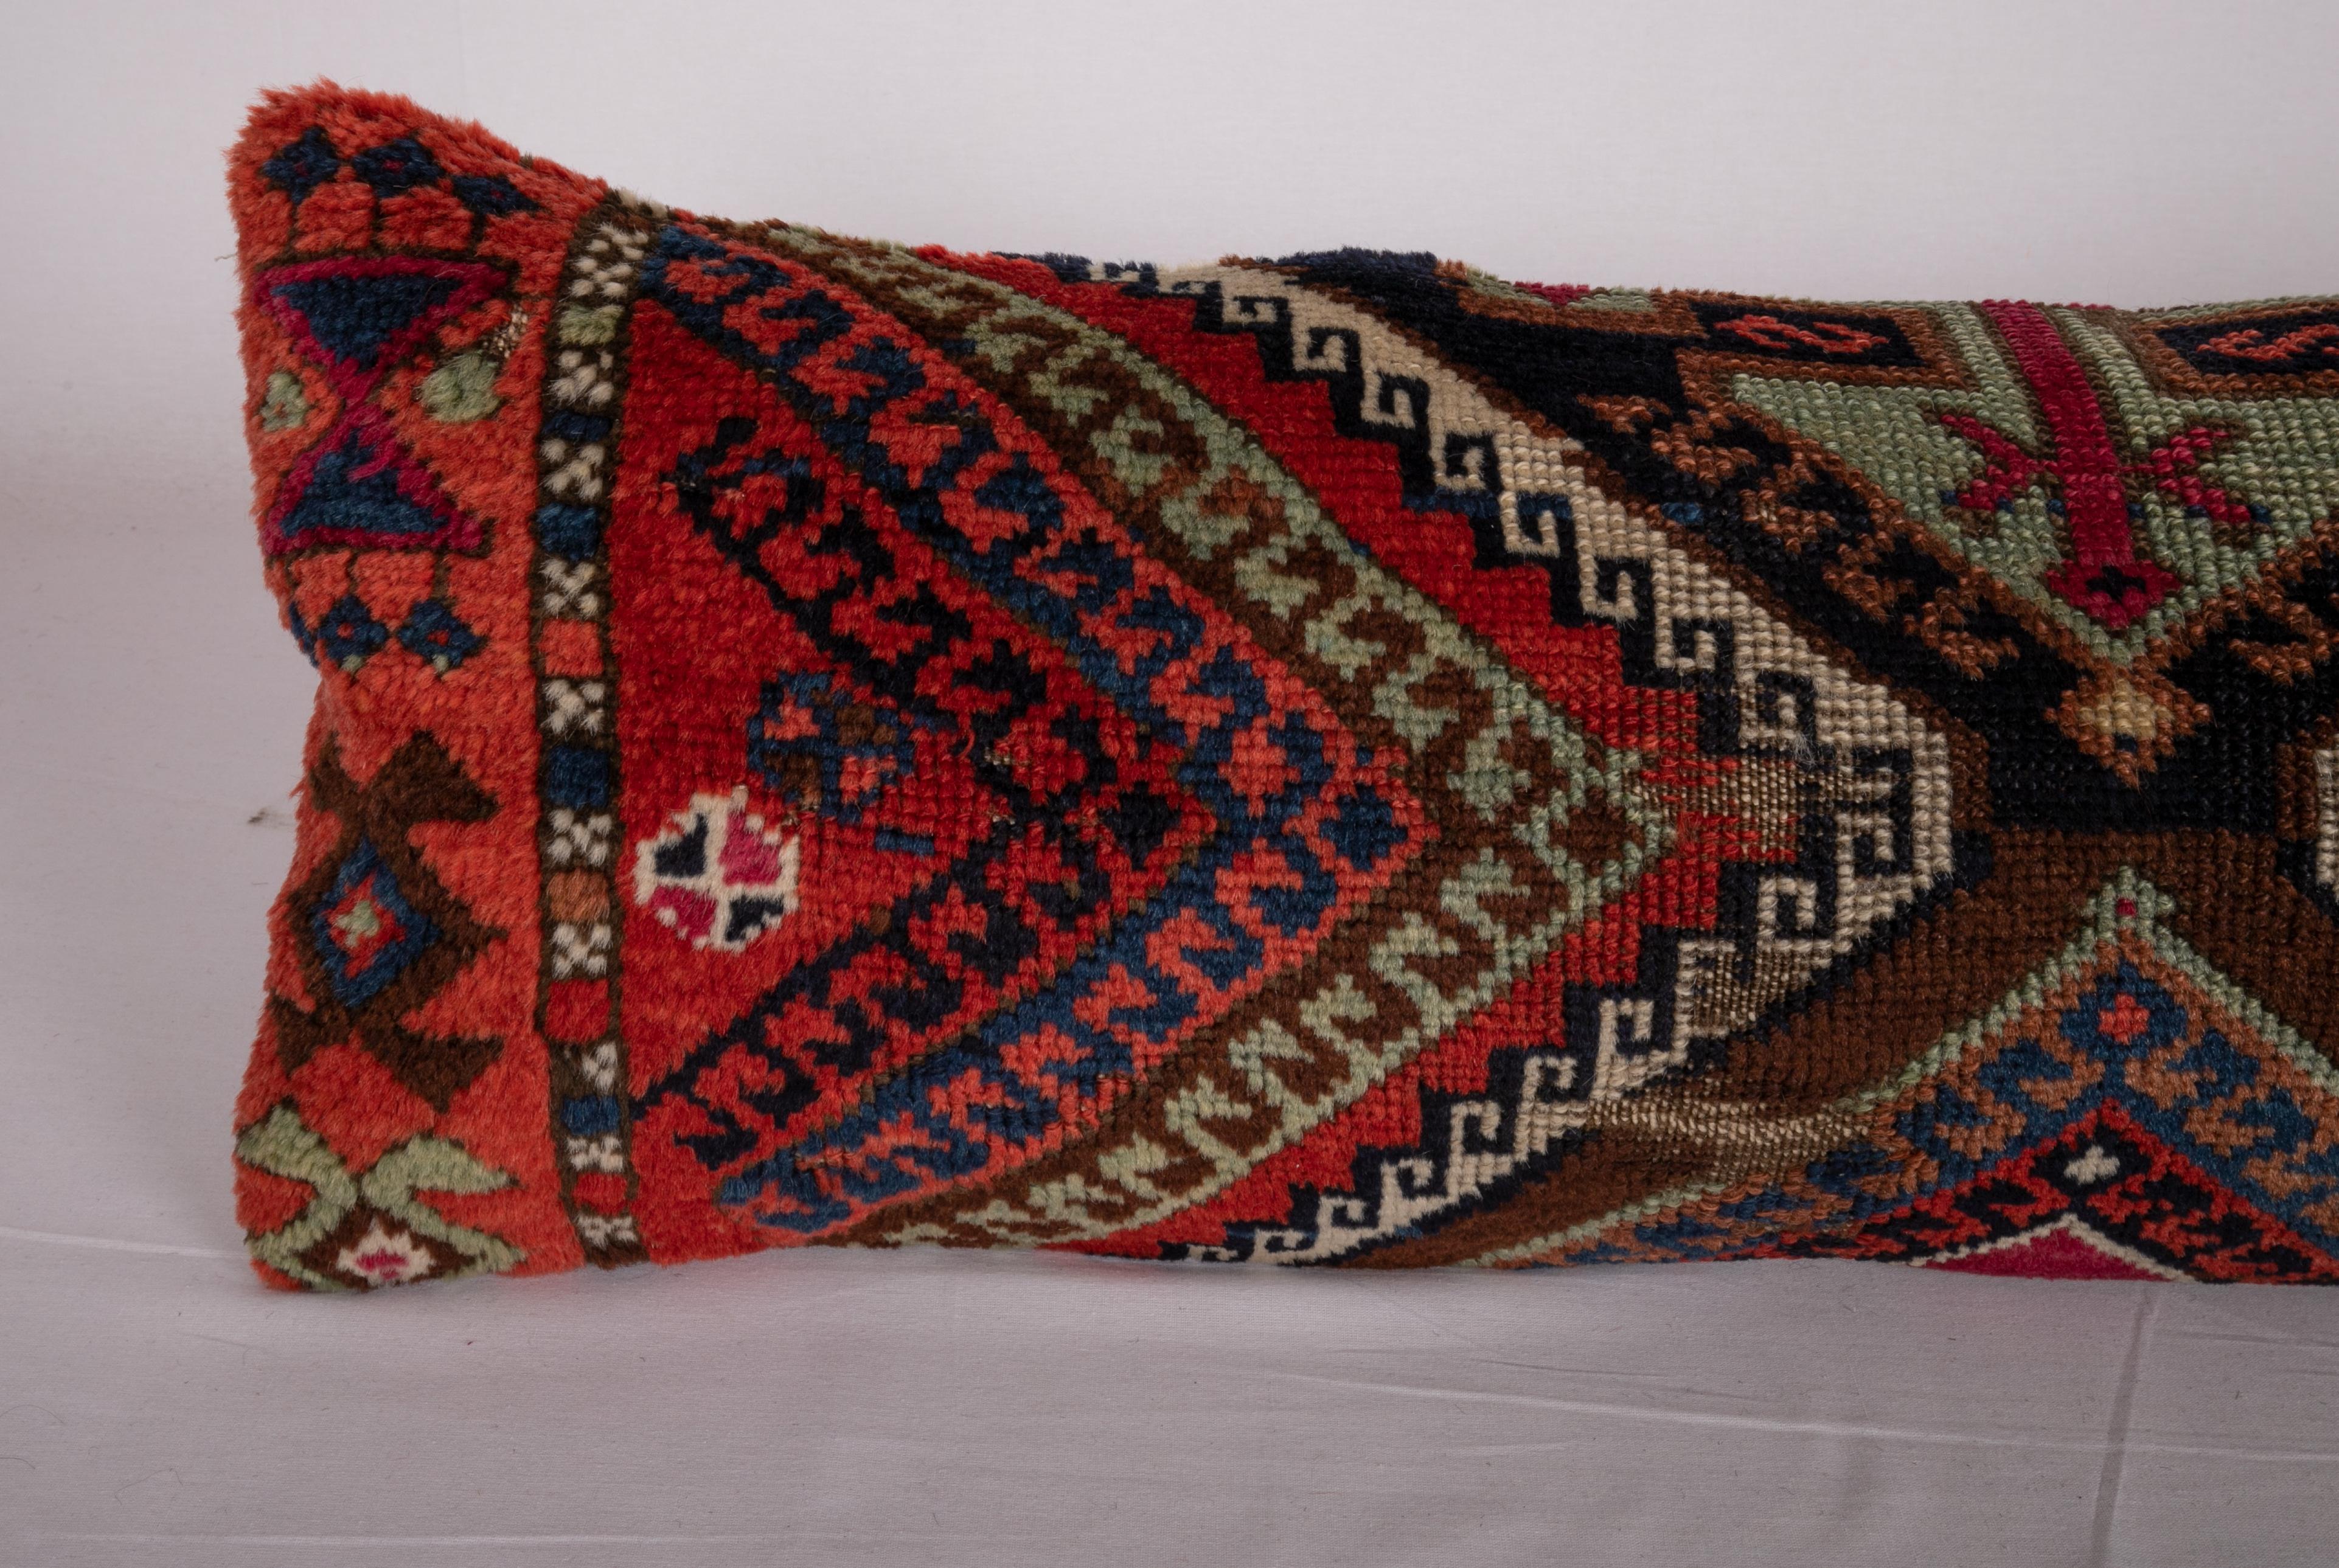 Hand-Woven Antique Rug Pillow Case Made from an East Anatolian Rug Fragment, 19th Century For Sale